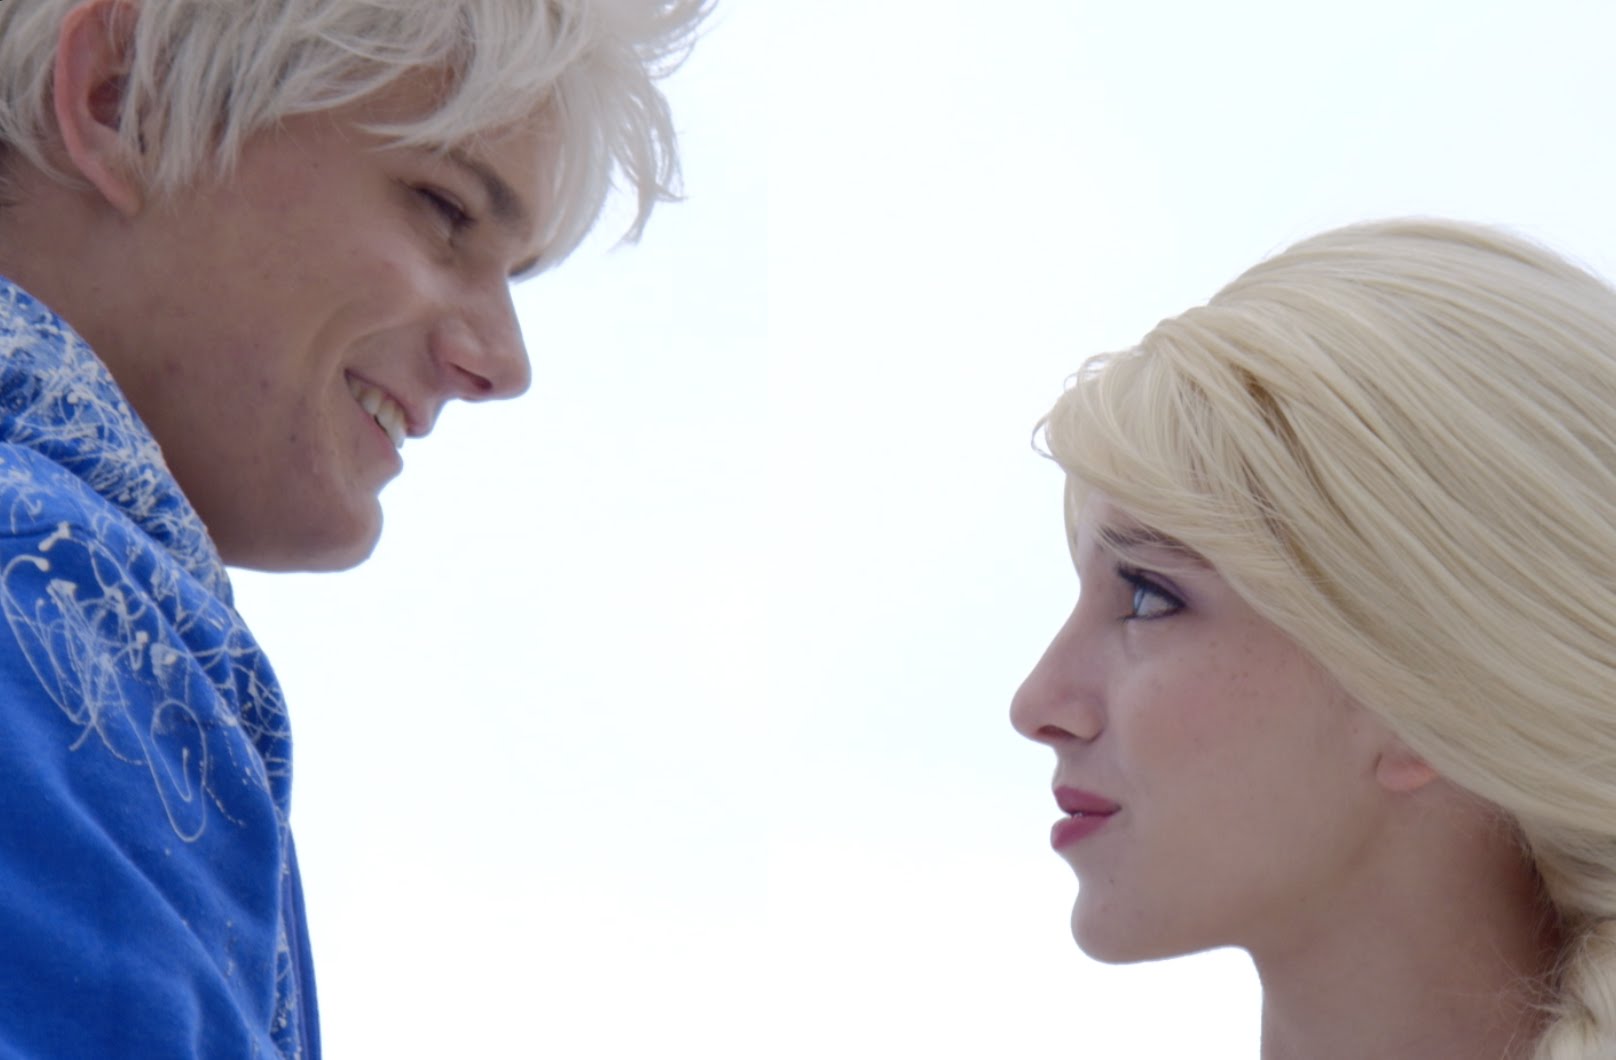 Working with Lemons – Find a Way (Jack Frost & Elsa)